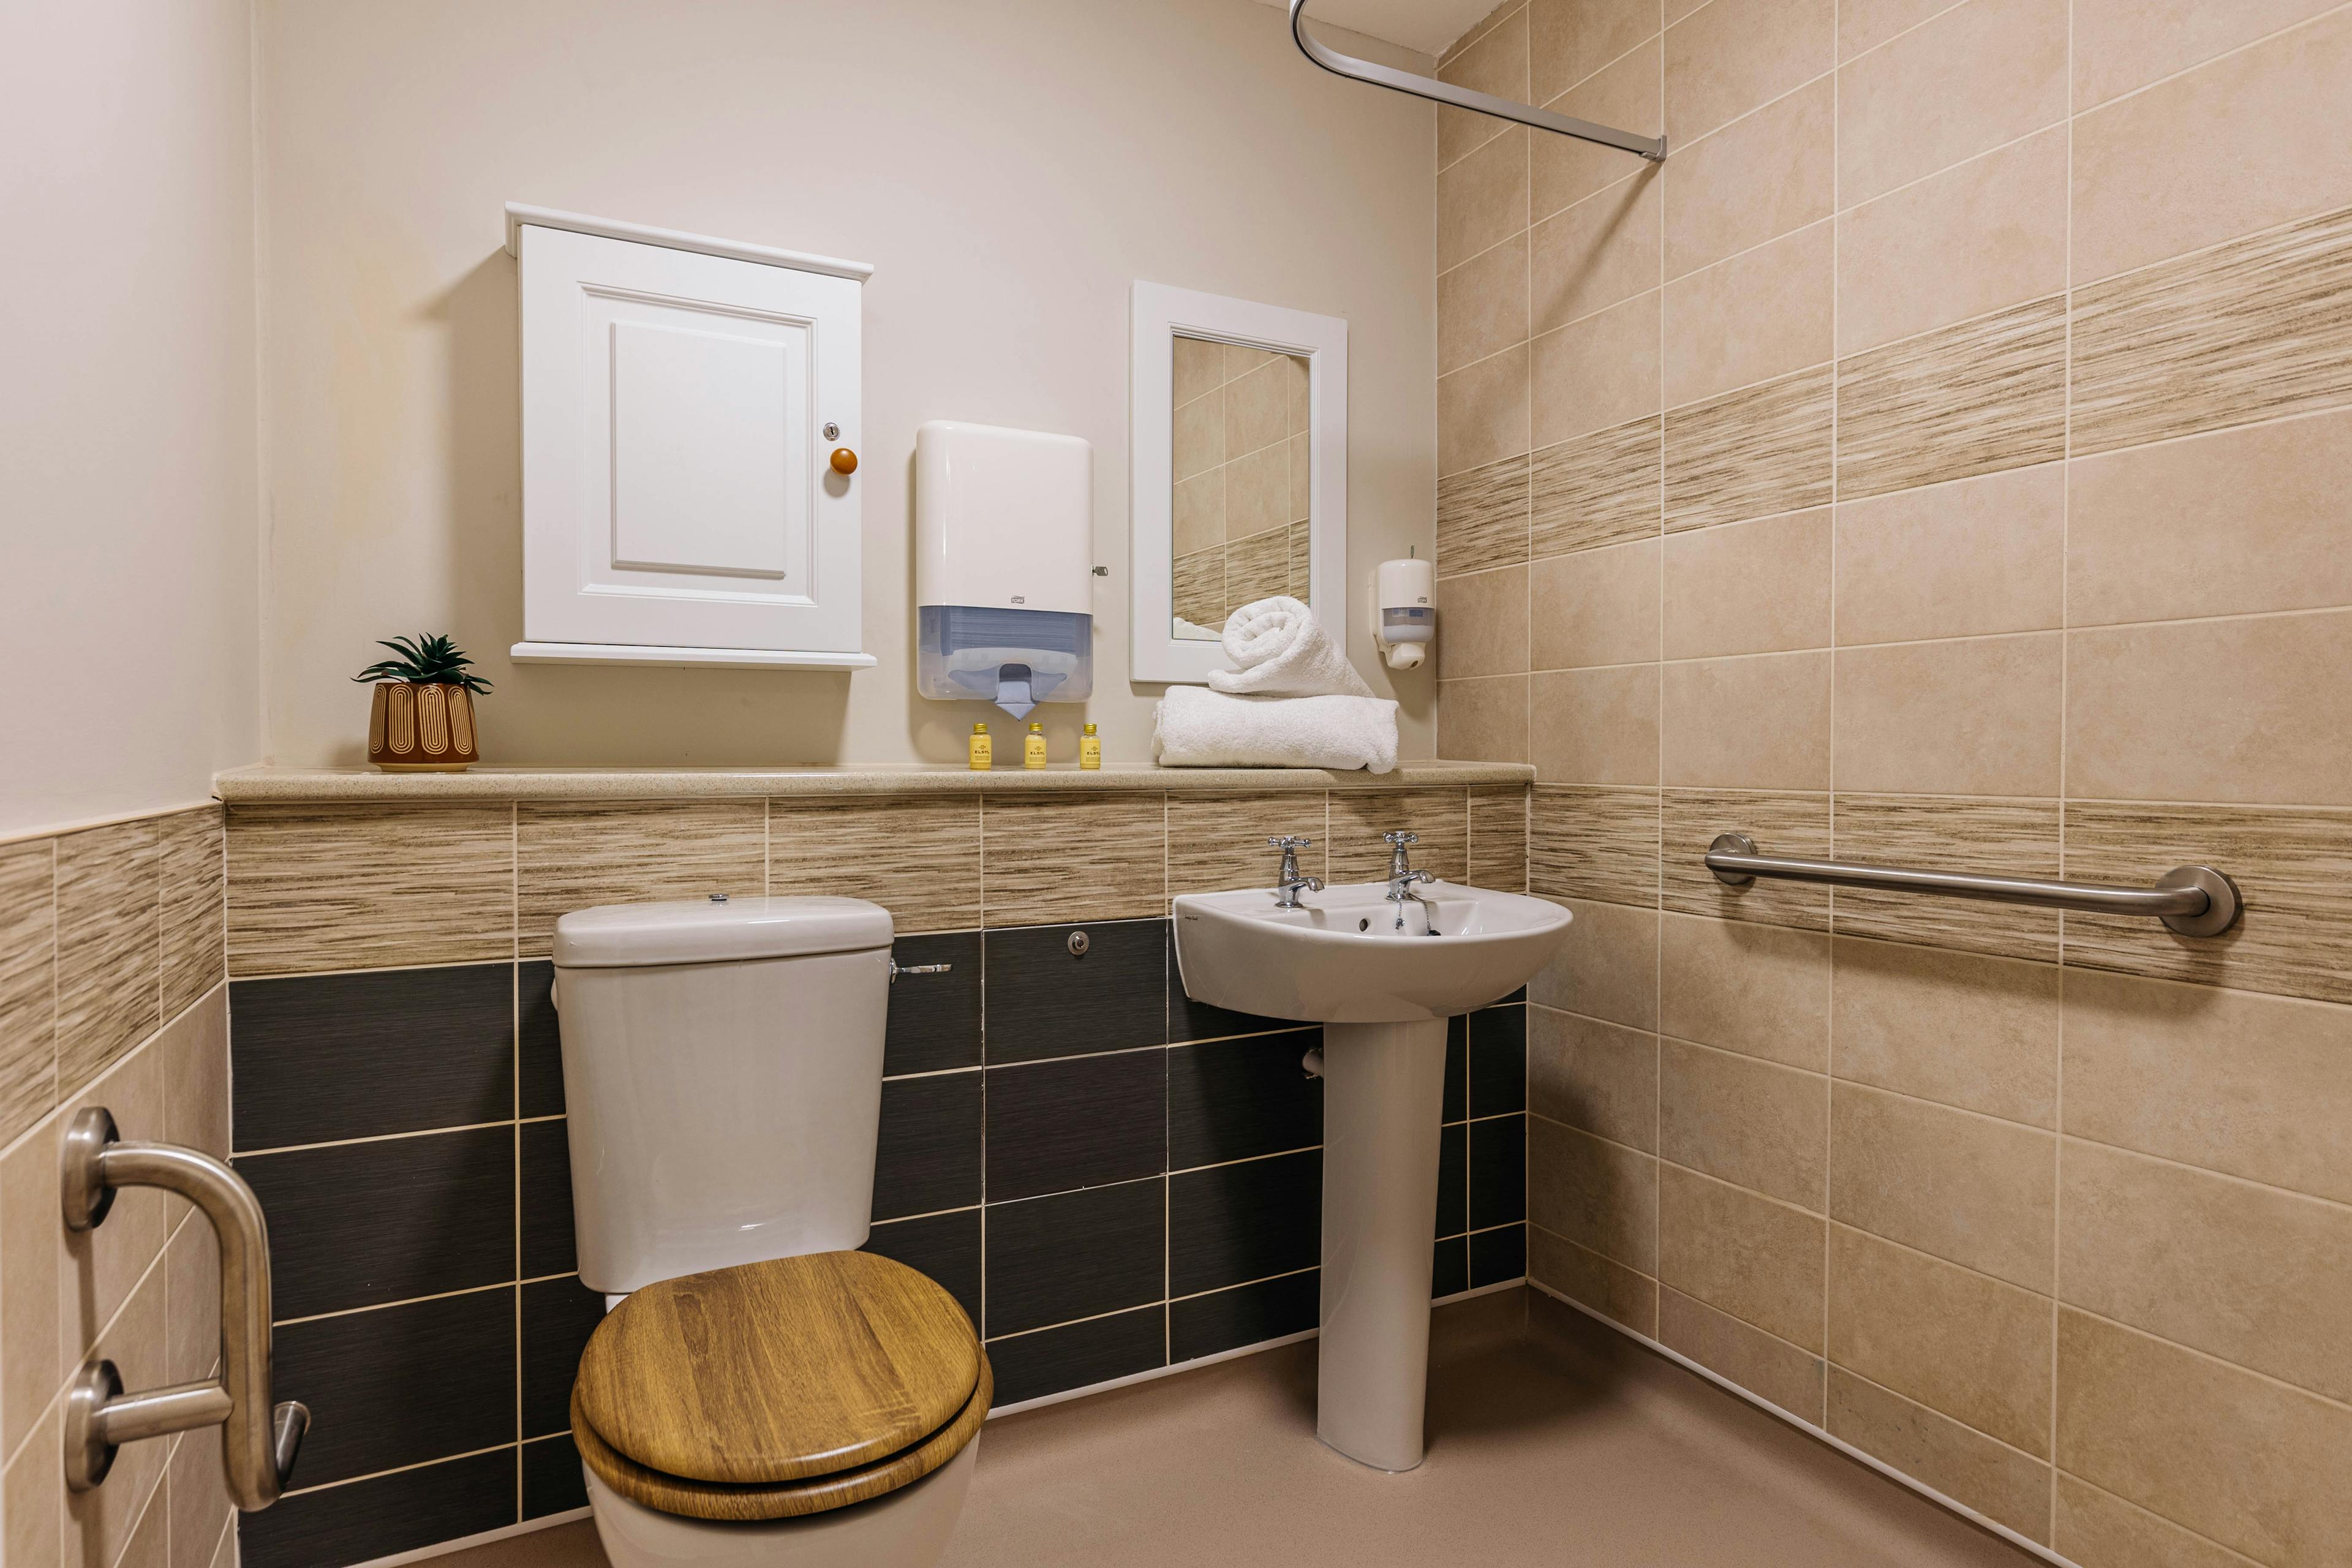 Bathroom at Scarborough Hall Care Home in Scarborough, North Yorkshire